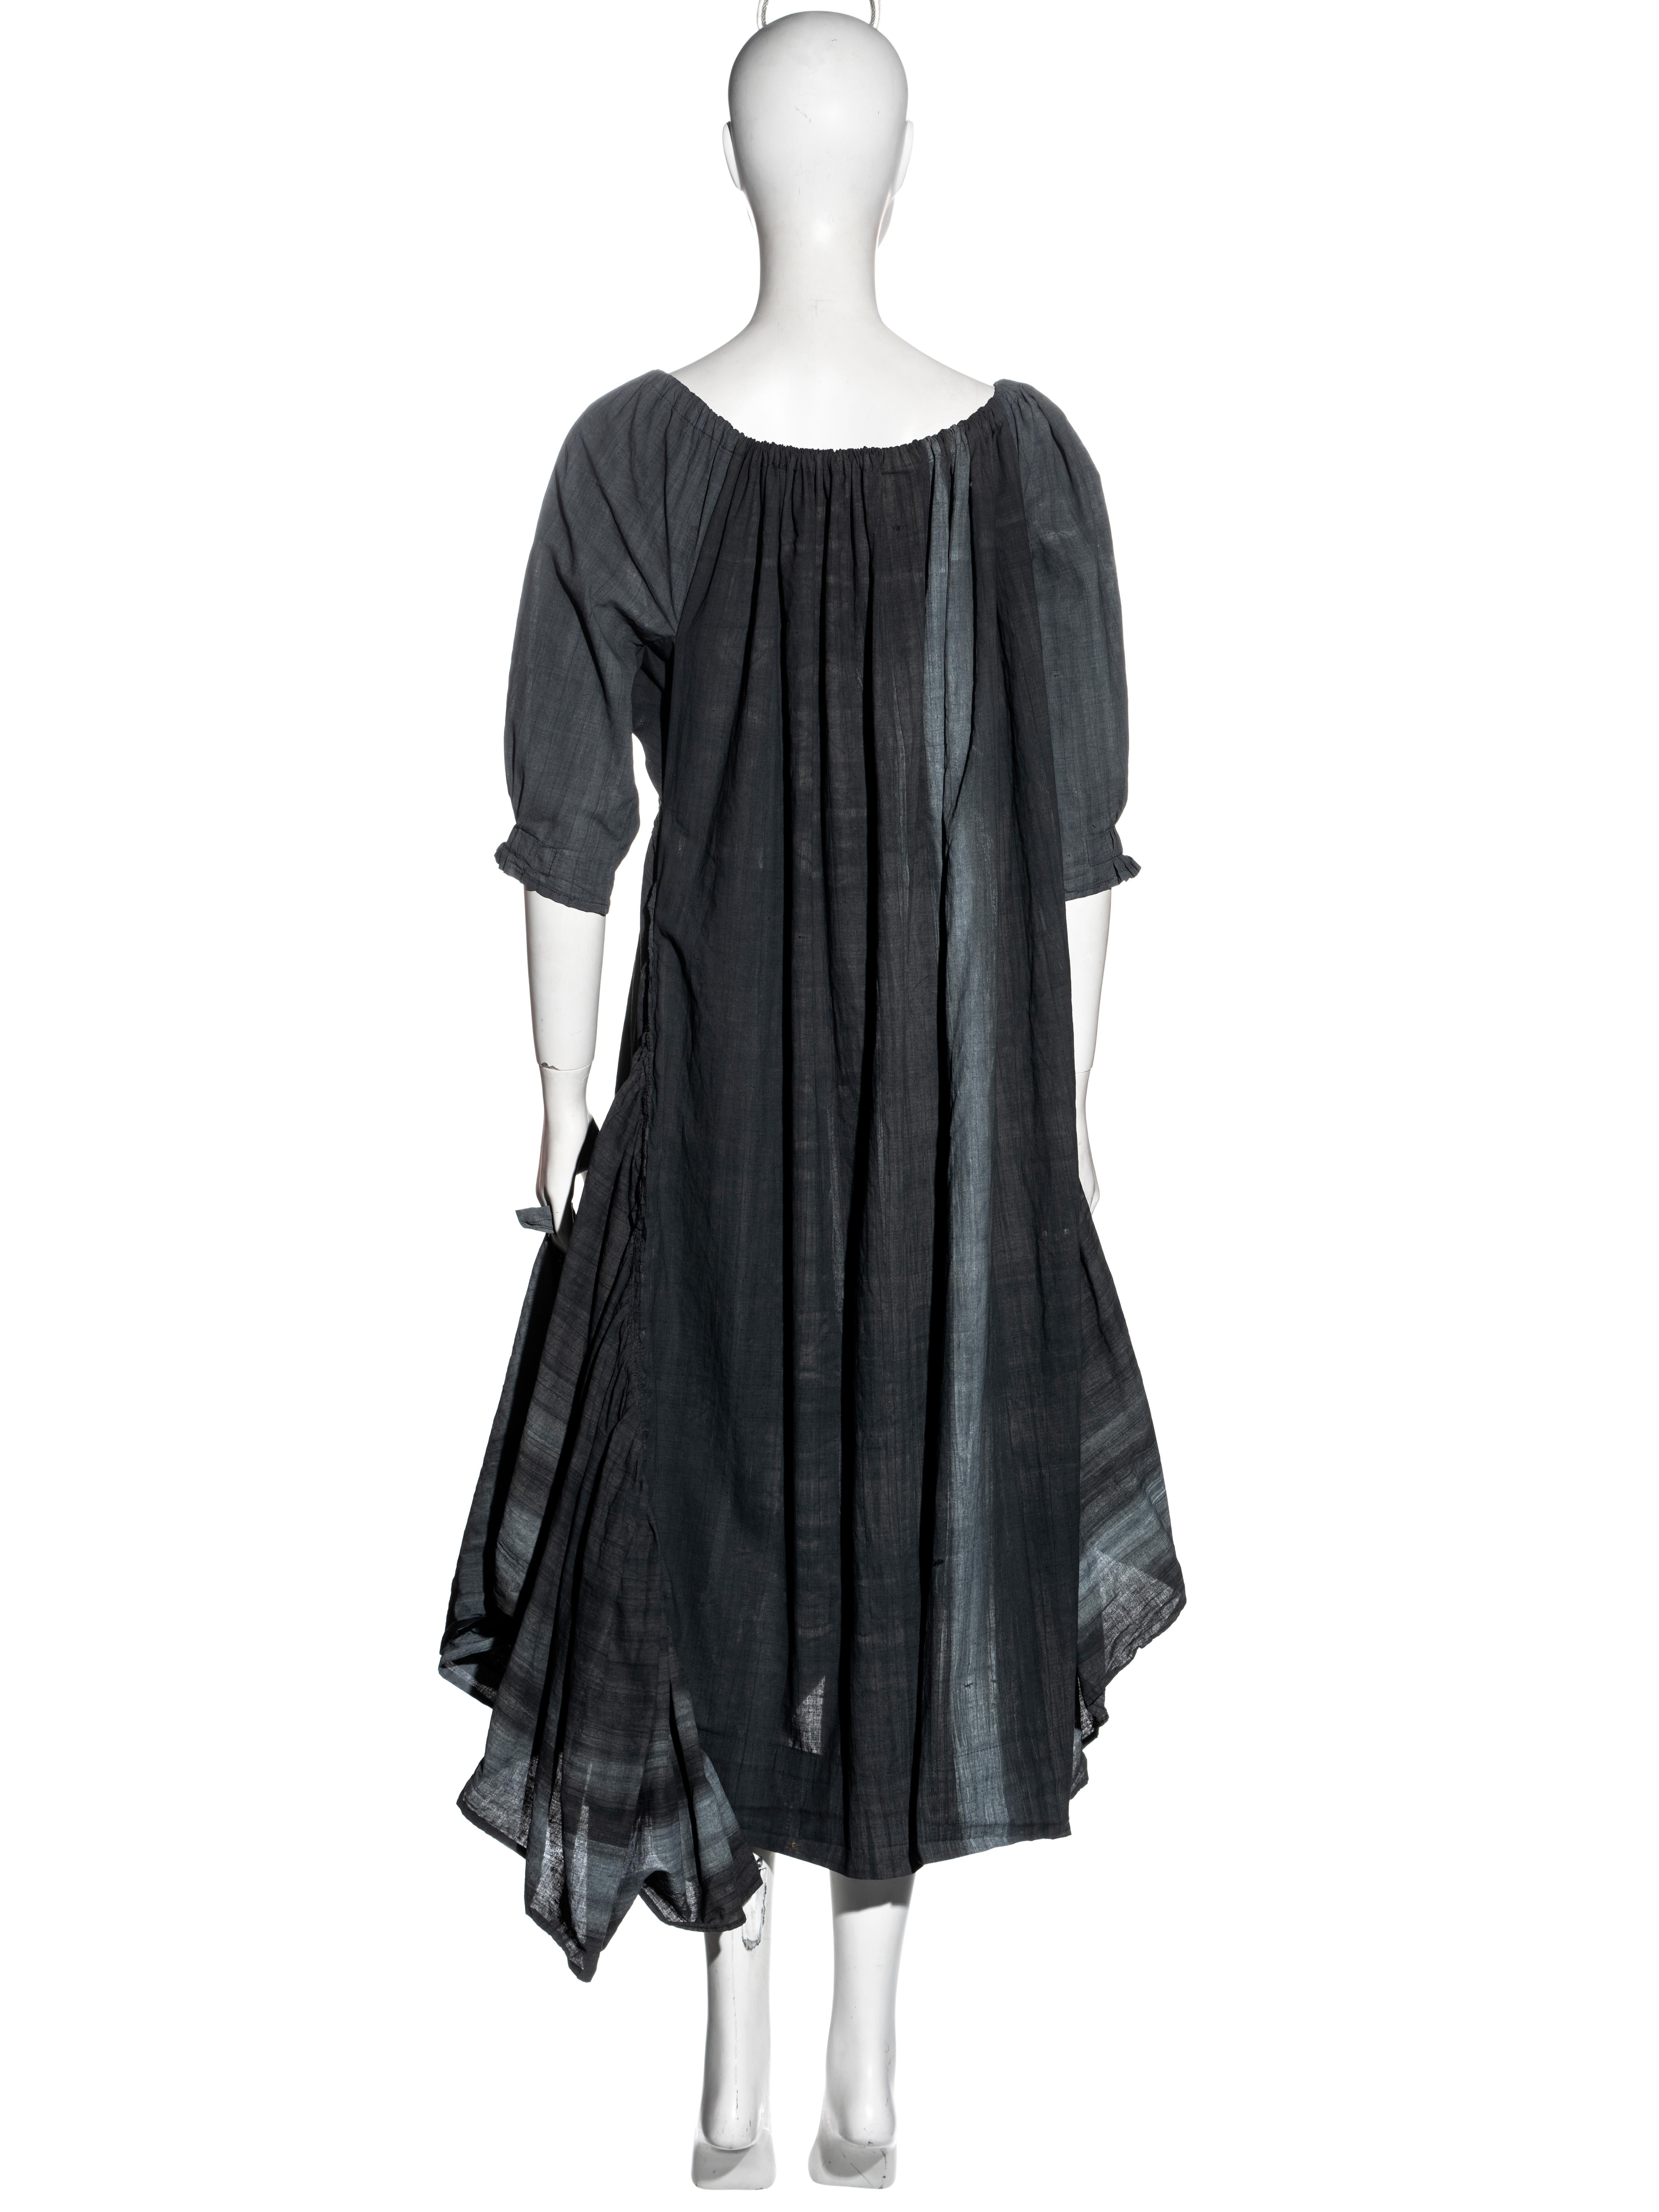 Worlds End by Vivienne Westwood and Malcolm McLaren grey smock dress, ss 1983 For Sale 3